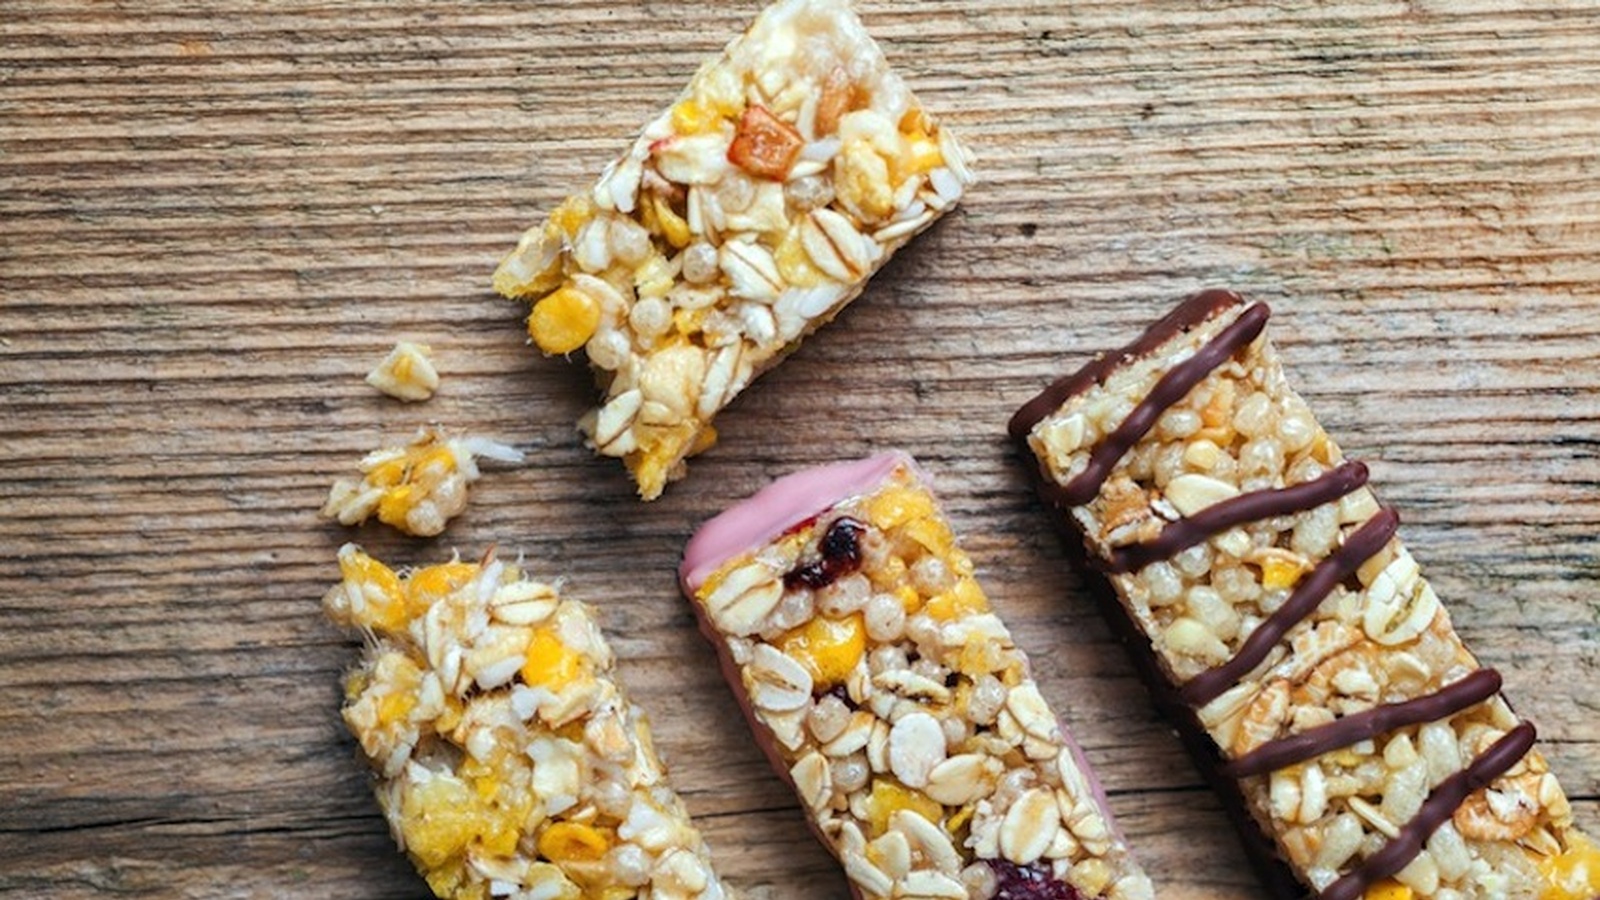 8 Snacks That Aren’t As Healthy As You Think